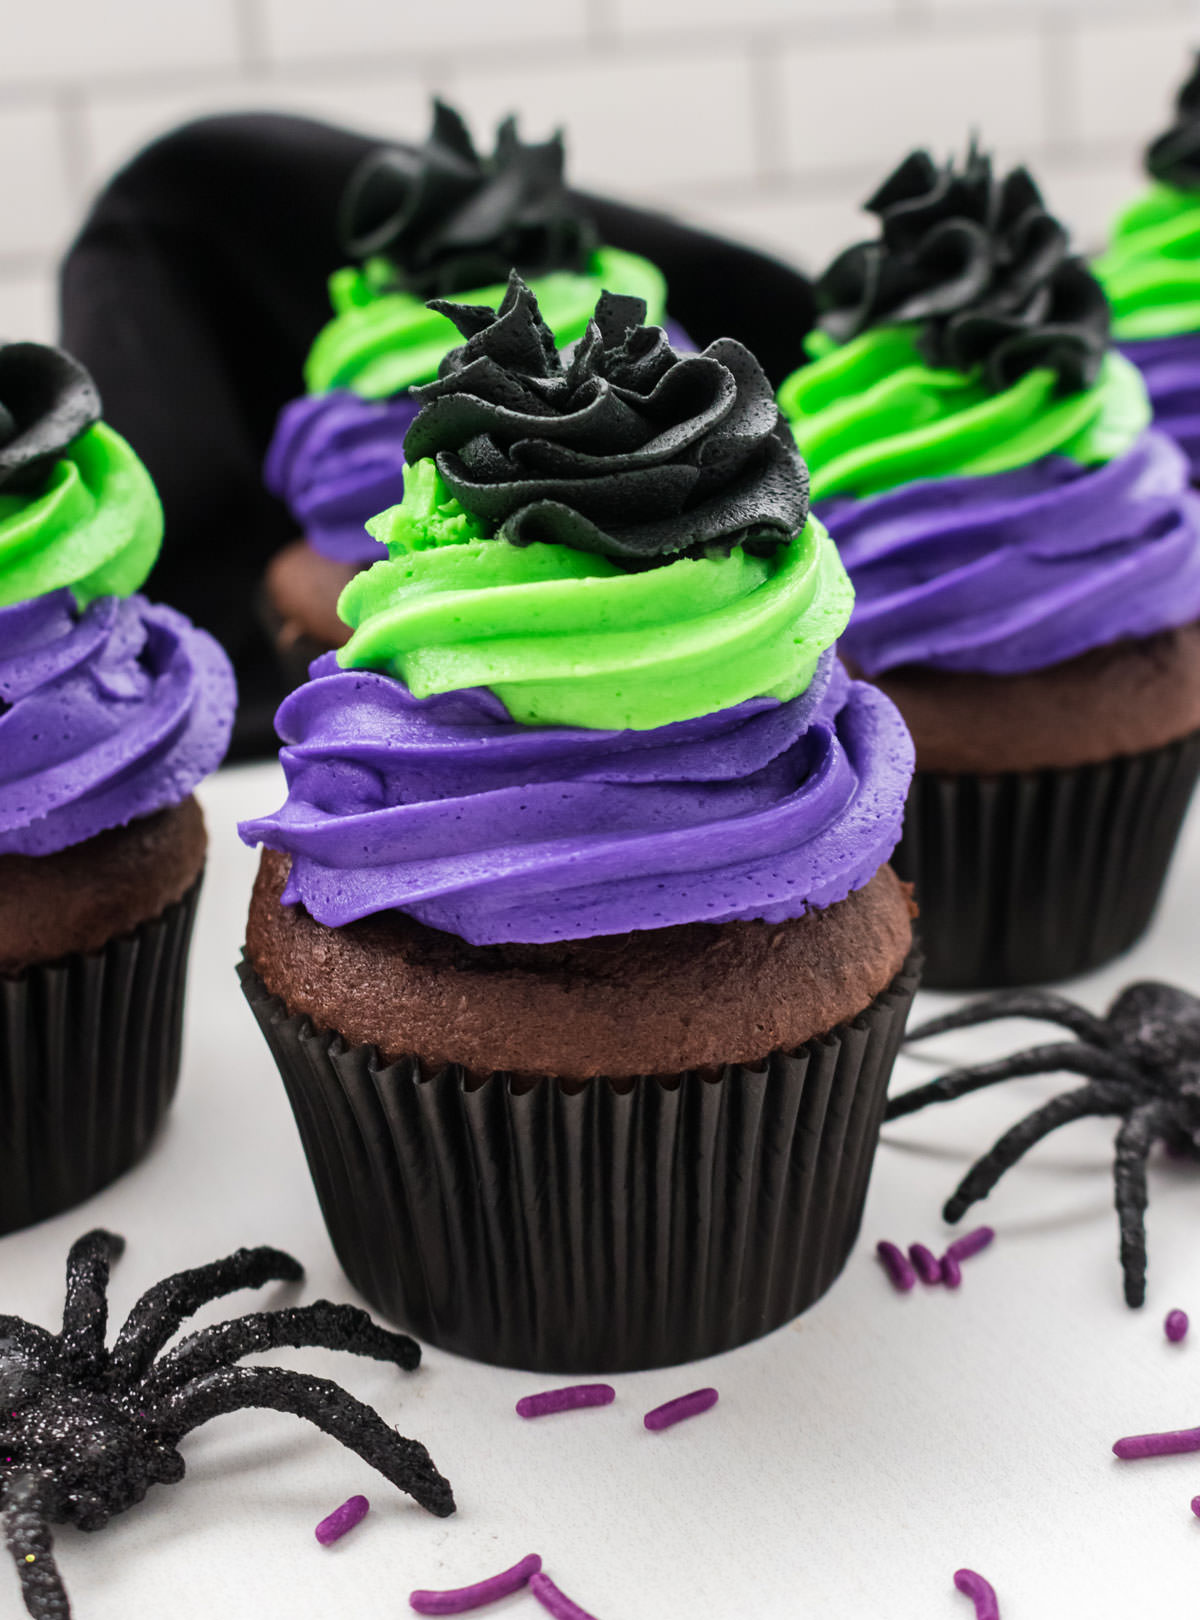 Closeup on five Bewitched Halloween Cupcakes sitting on a white table surround by toy spiders and sprinkles.